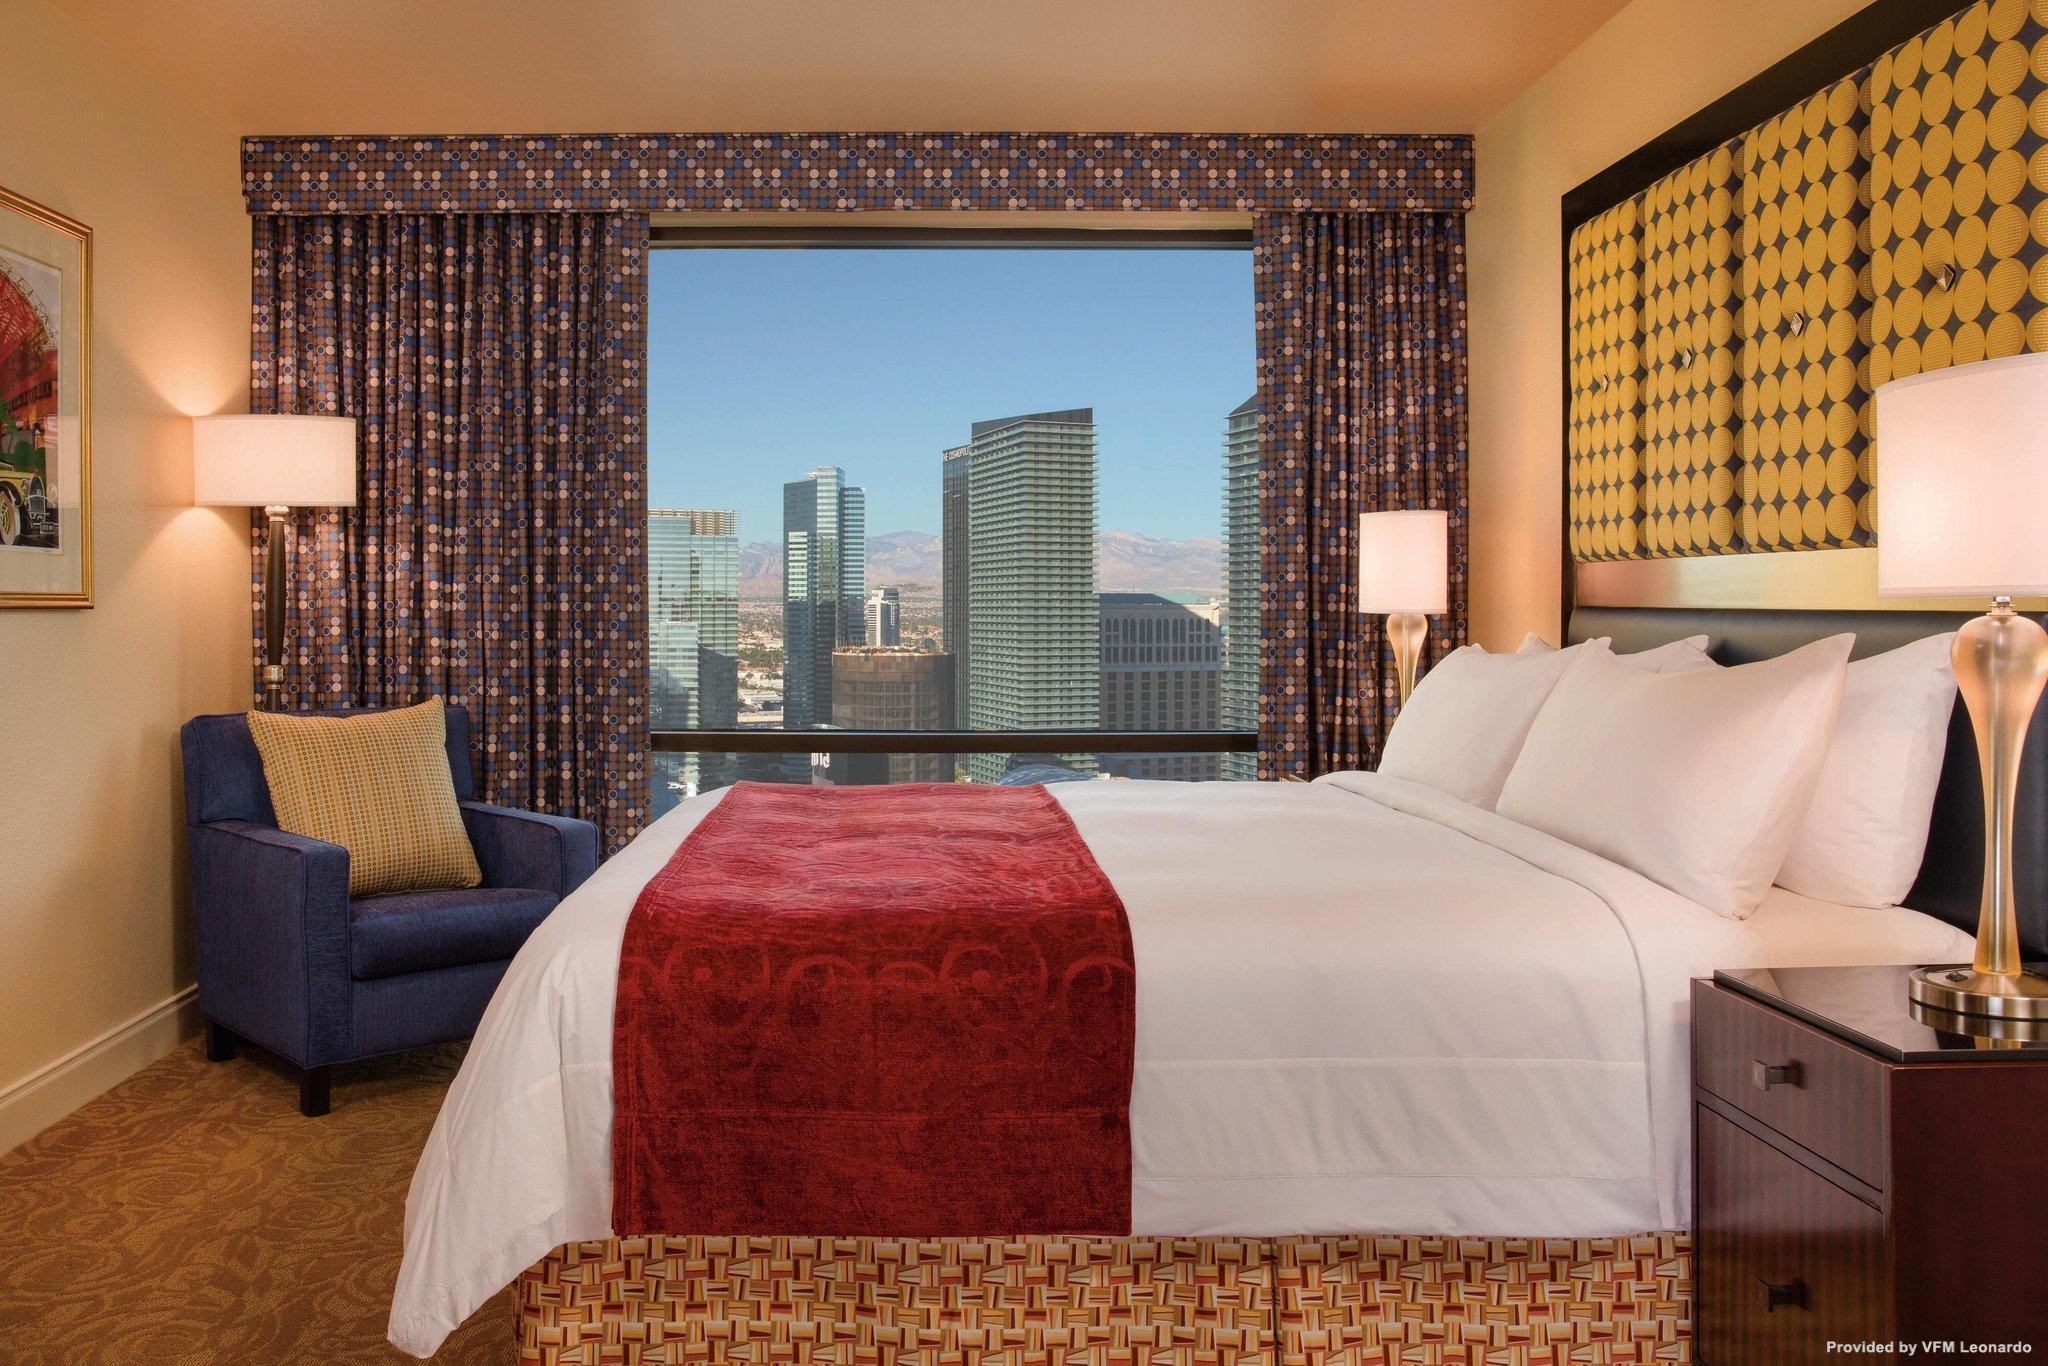 Hotel Marriott's Grand Chateau - 5 HRS star hotel in Las Vegas